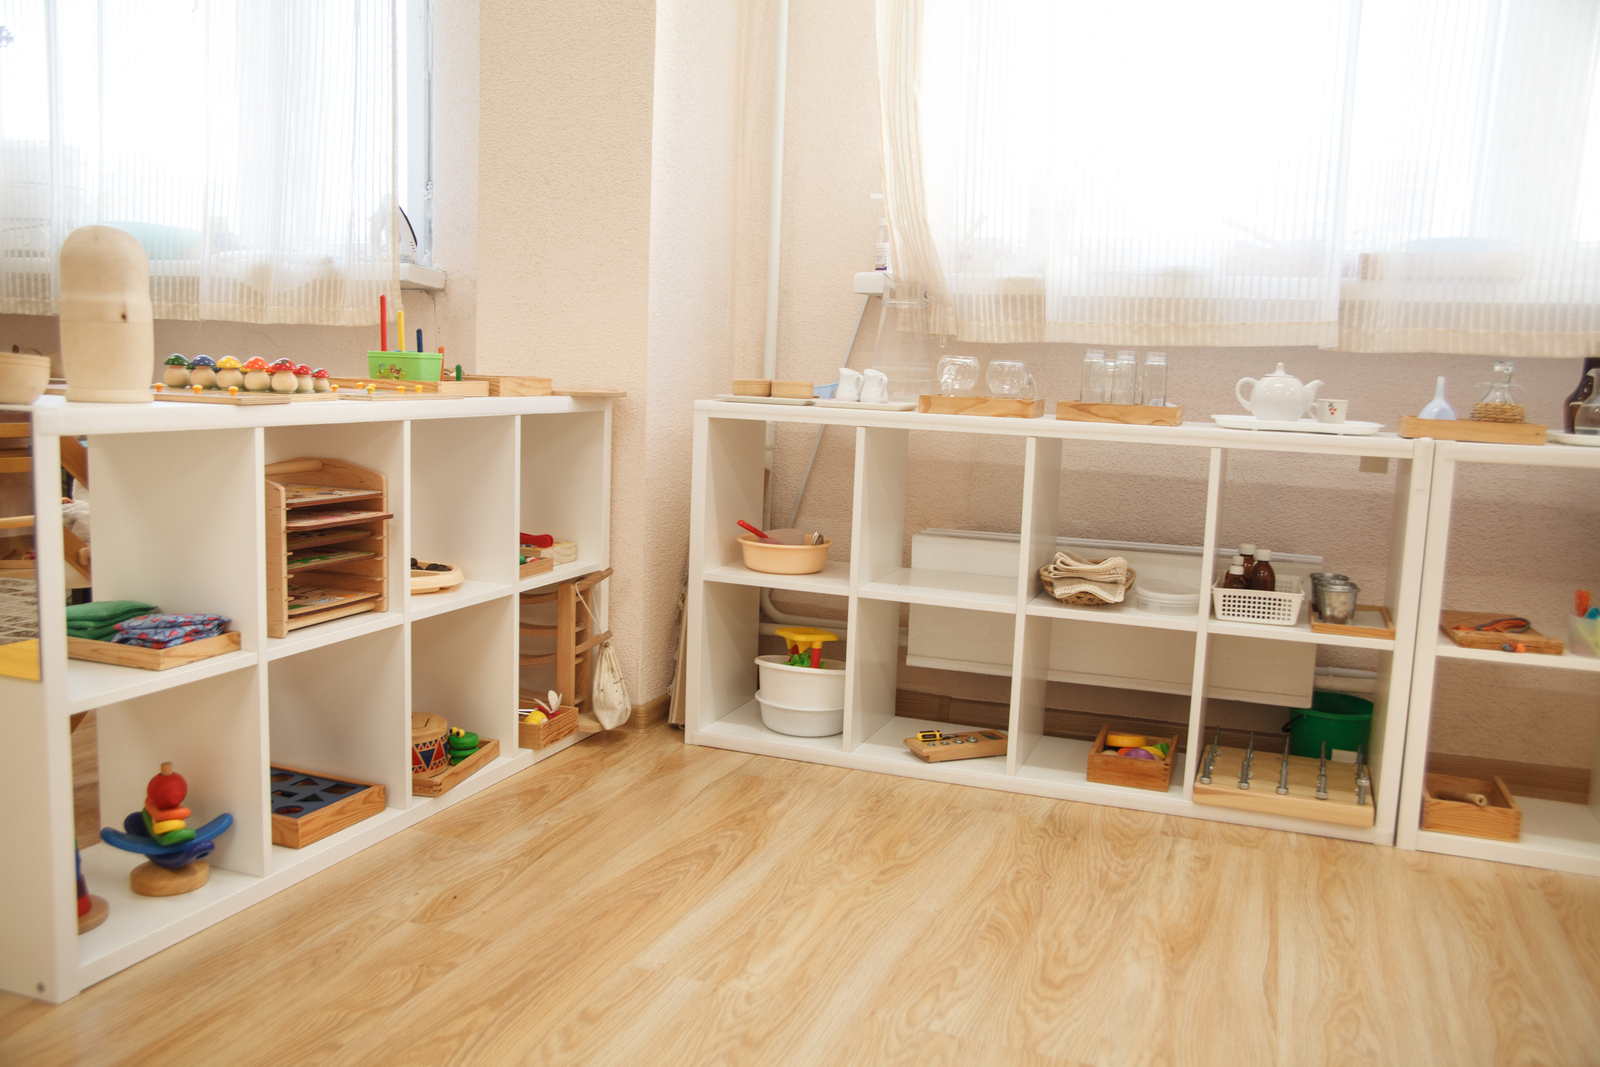 Shelving in a Montessori class with wood and glass material